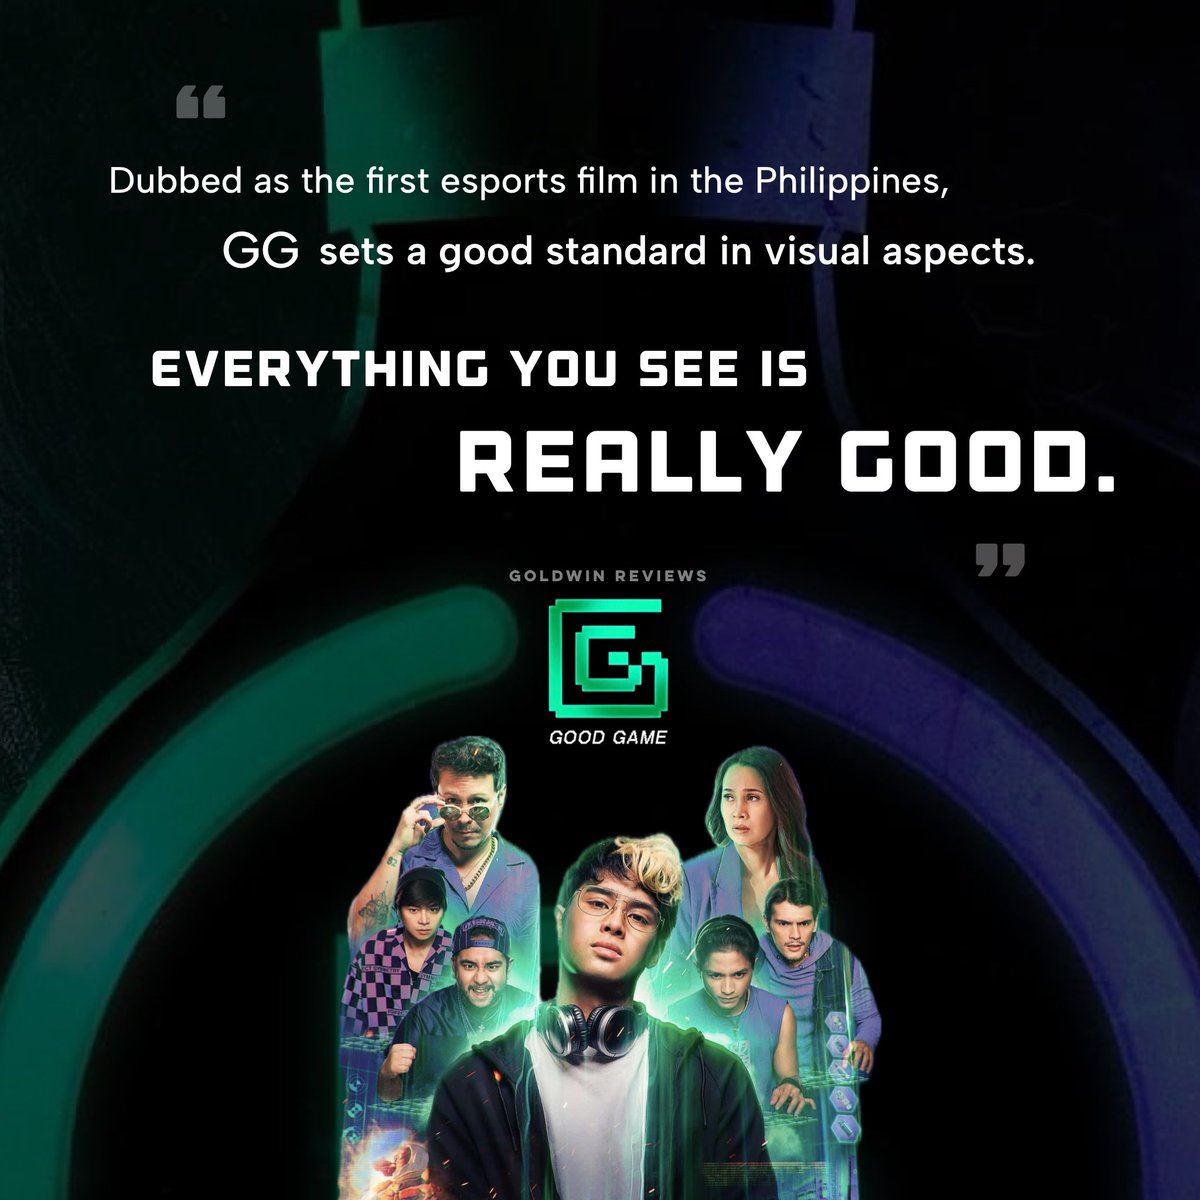 “Dubbed as the first esports film in the Philippines, 𝘎𝘎 sets a good standard in visual aspects. Everything you see is really good.”

Read full movie review here: goldwinreviews.com/post/good-game

#GGTheMovie #DonnyPangilinan #GoodGameTheMovie #GGTheMovieNowShowing